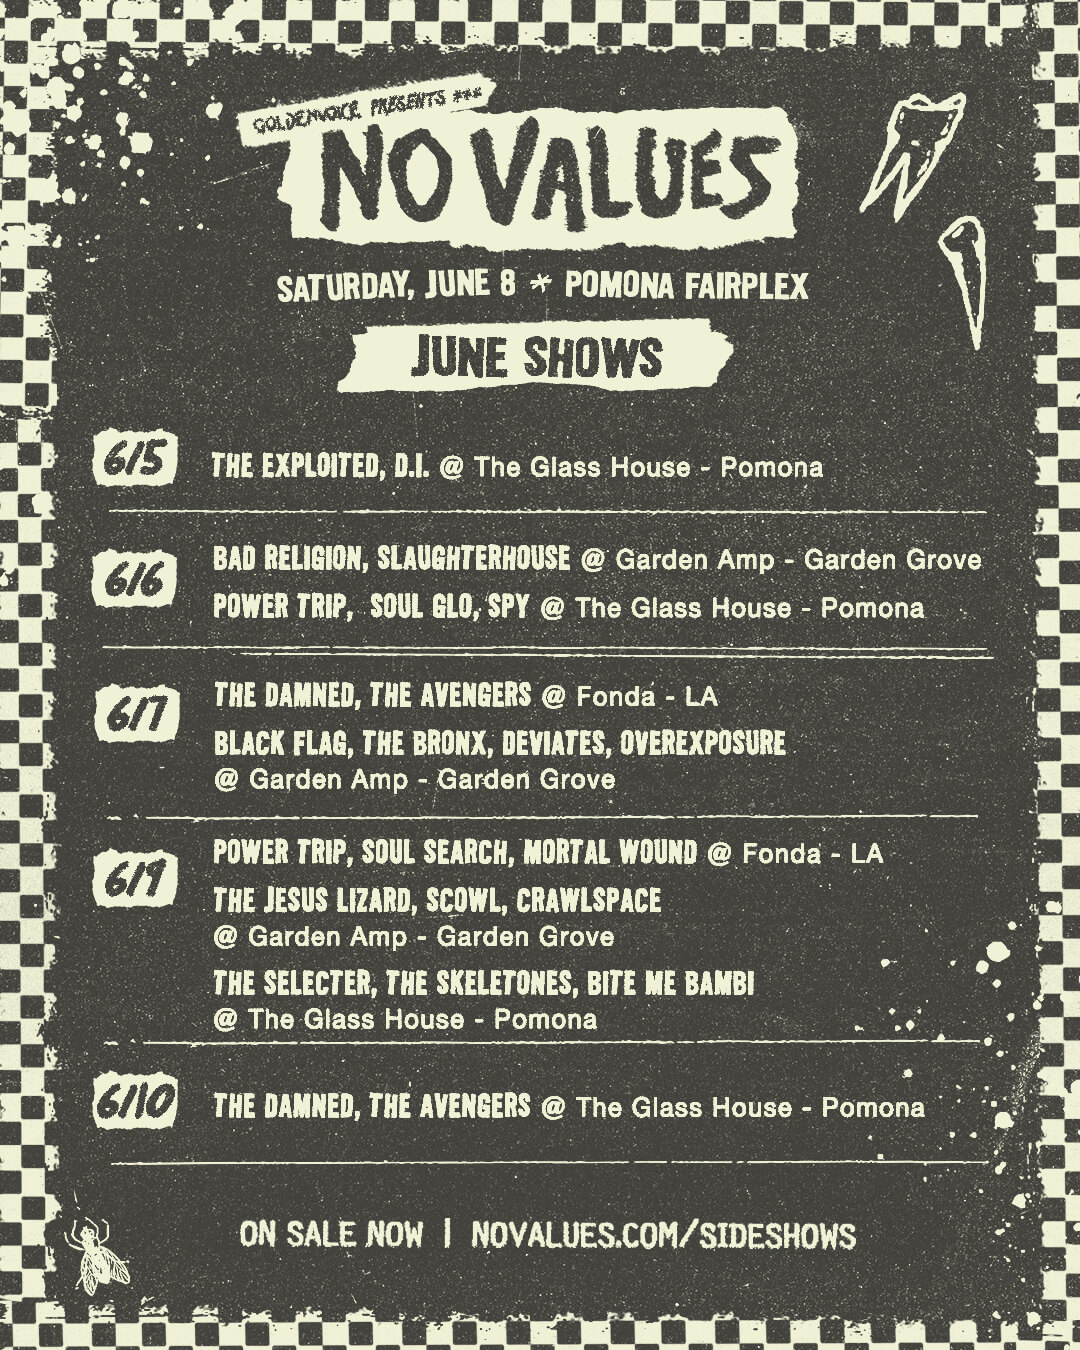 June Sideshows